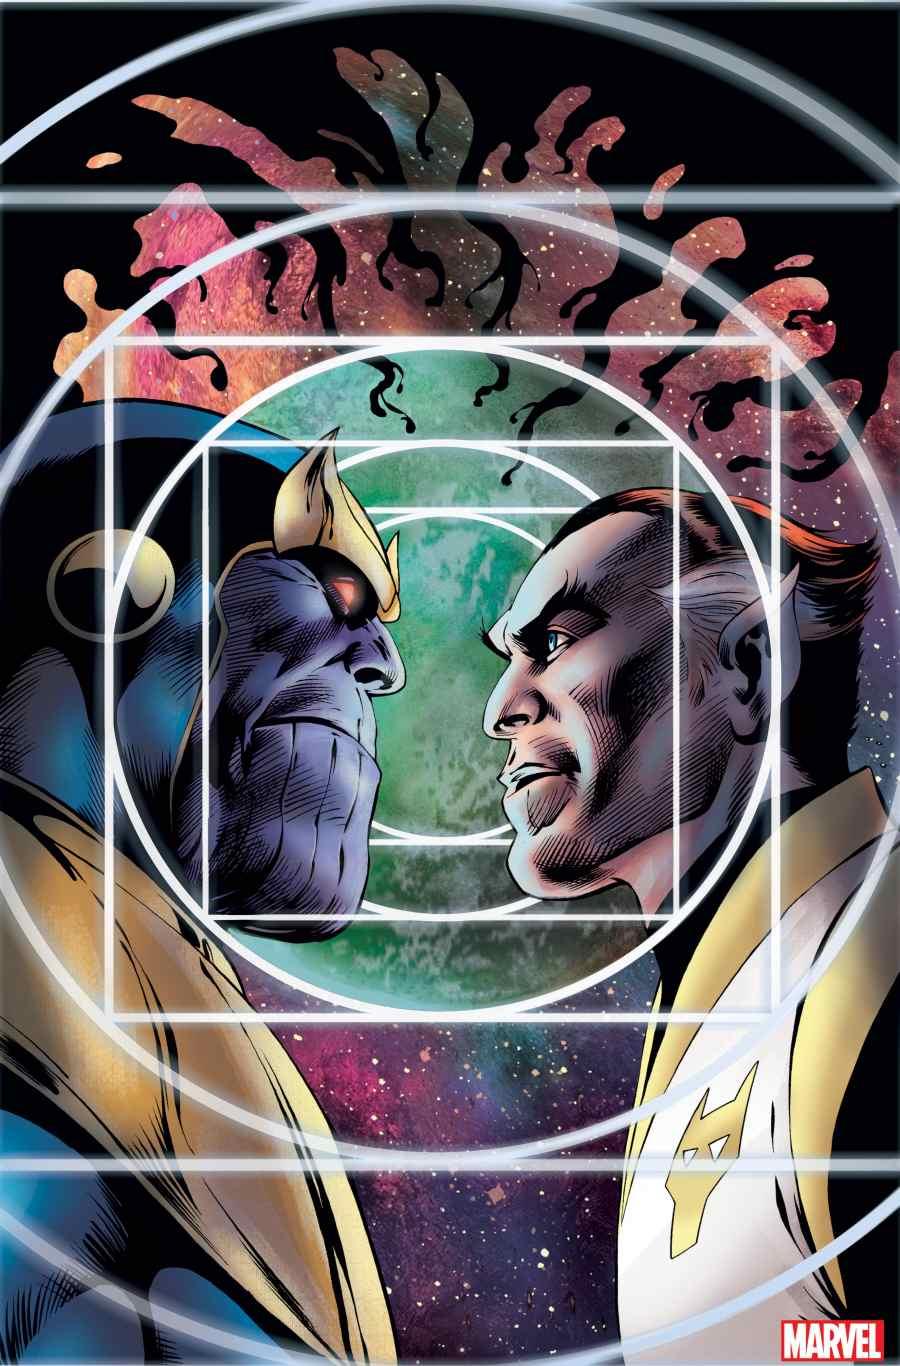 Thanos: The Infinity Siblings Vol. 1 #1